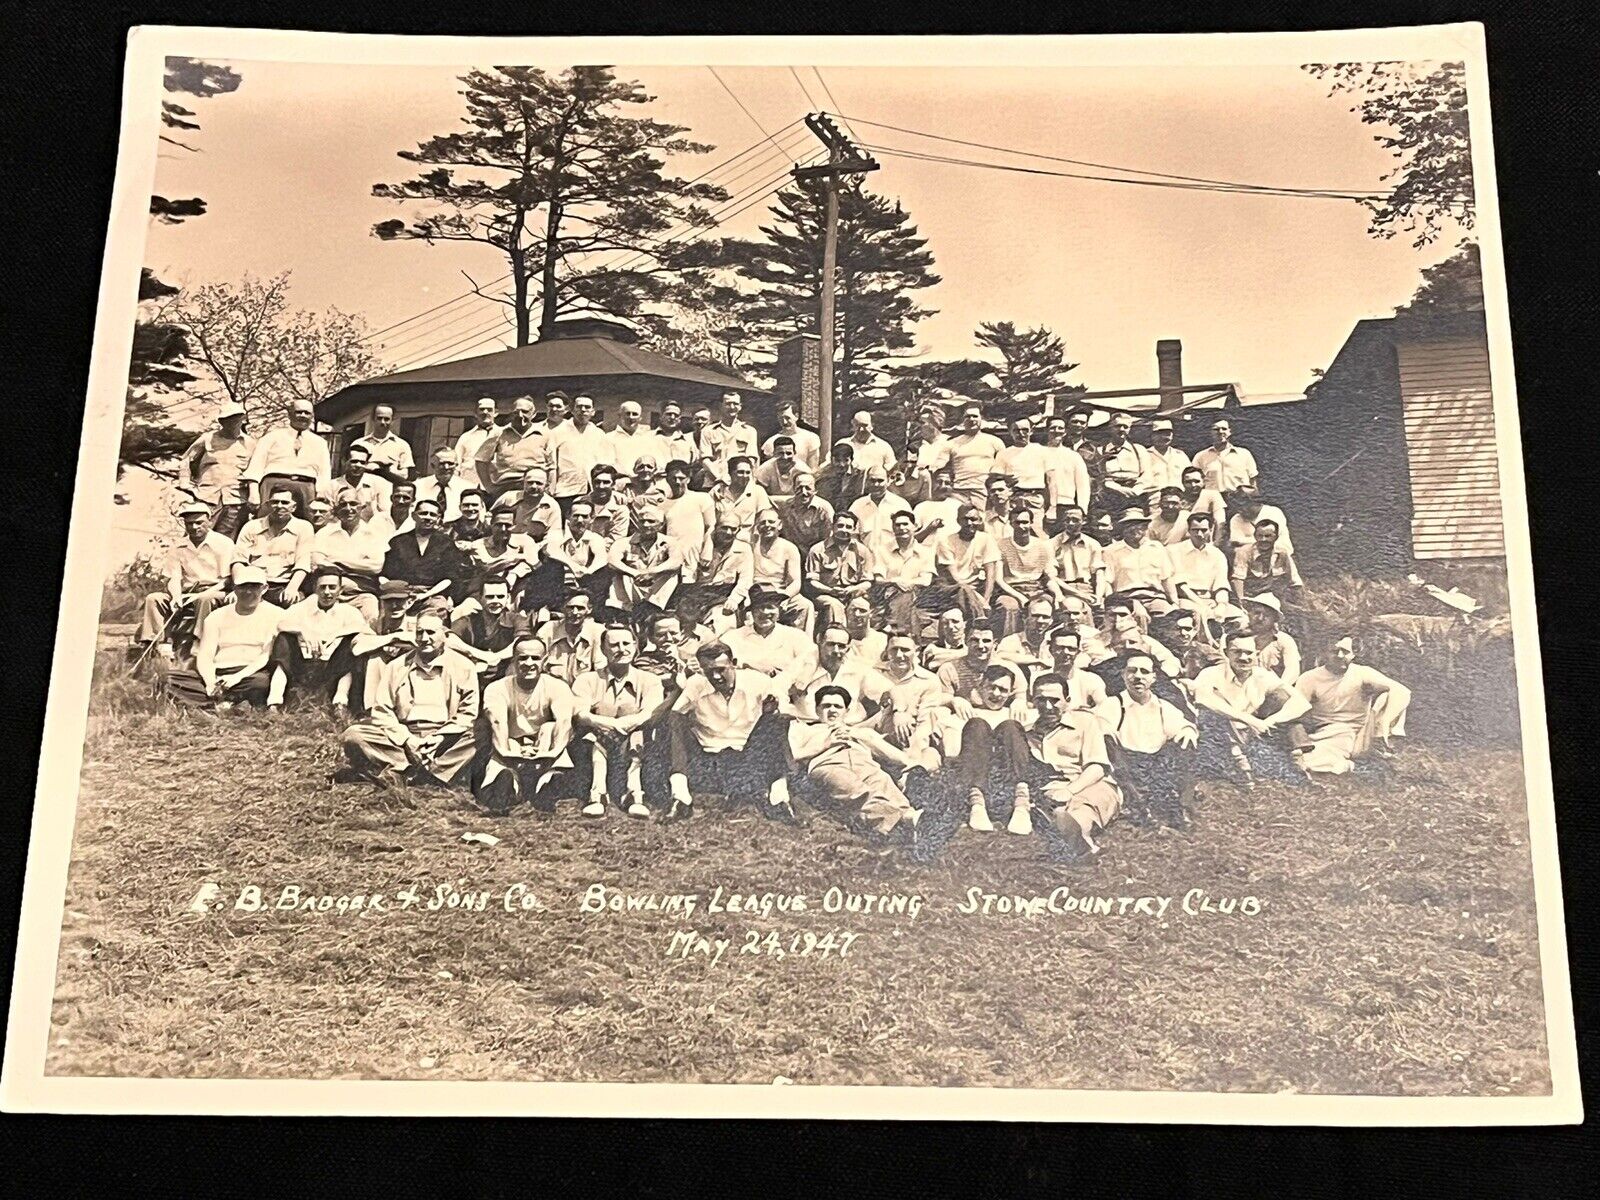 Vintage 1947 Photo Stowe Country Club Bowling Outing Vermont 8x10”